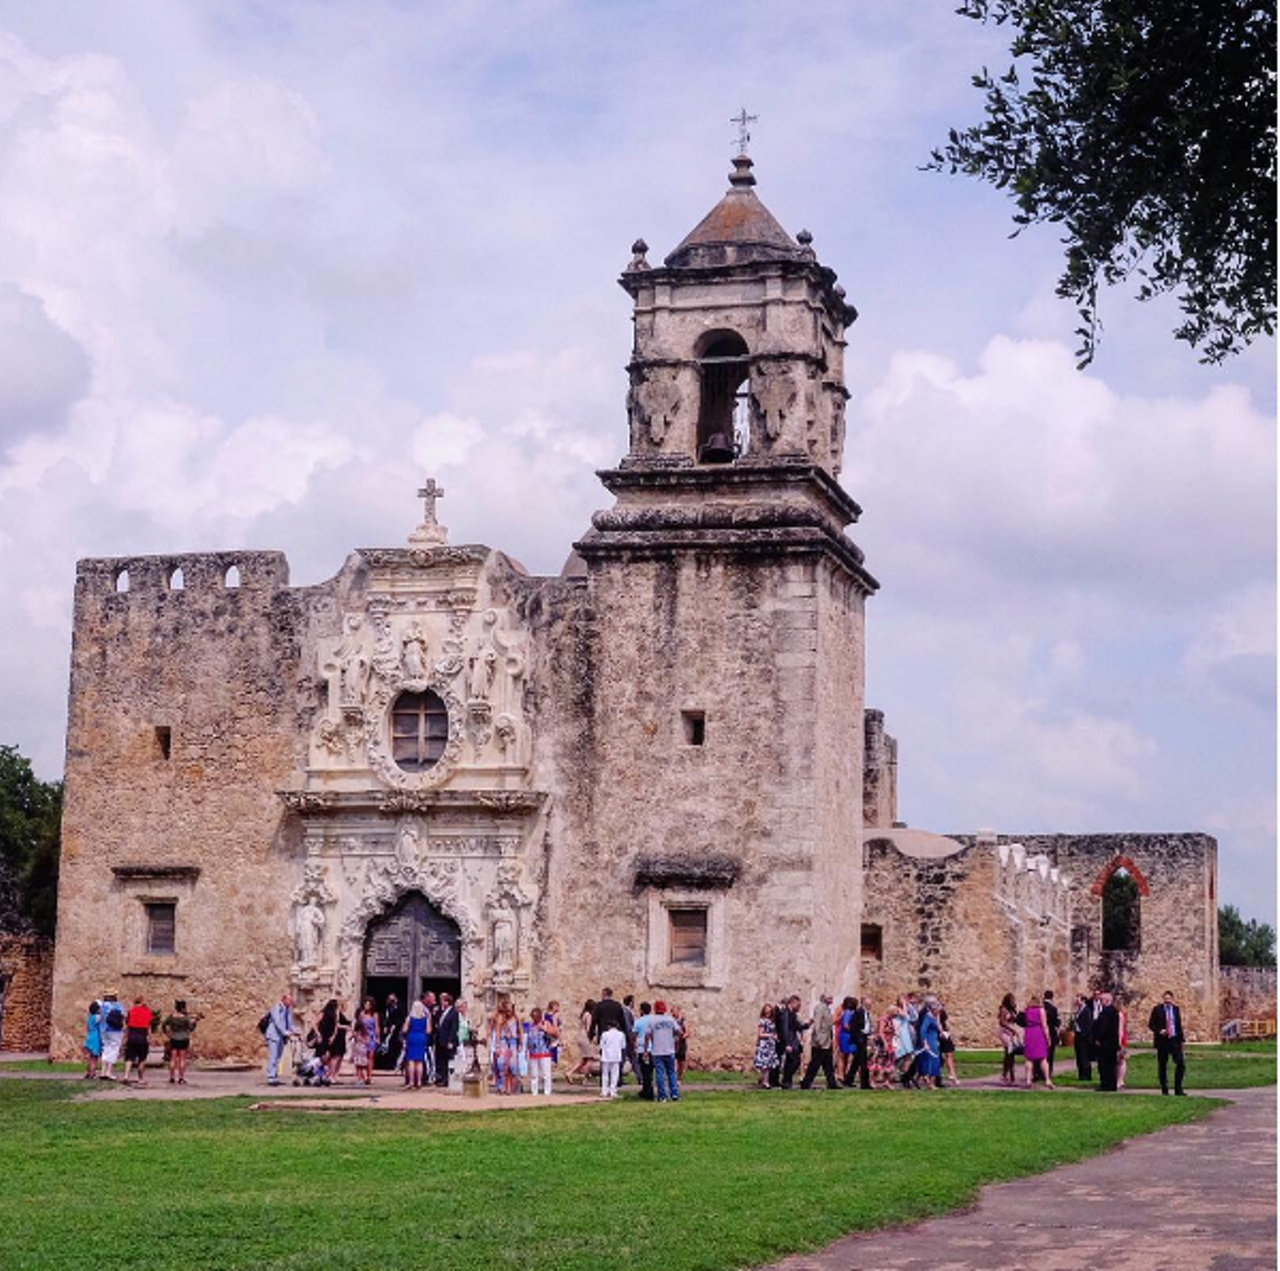 San Antonio Missions National Historical Park
nps.gov/saan
Hike or bike down the Missions trail and take in revisit the historical and cultural landmarks. Photo via Instagram, kathanie